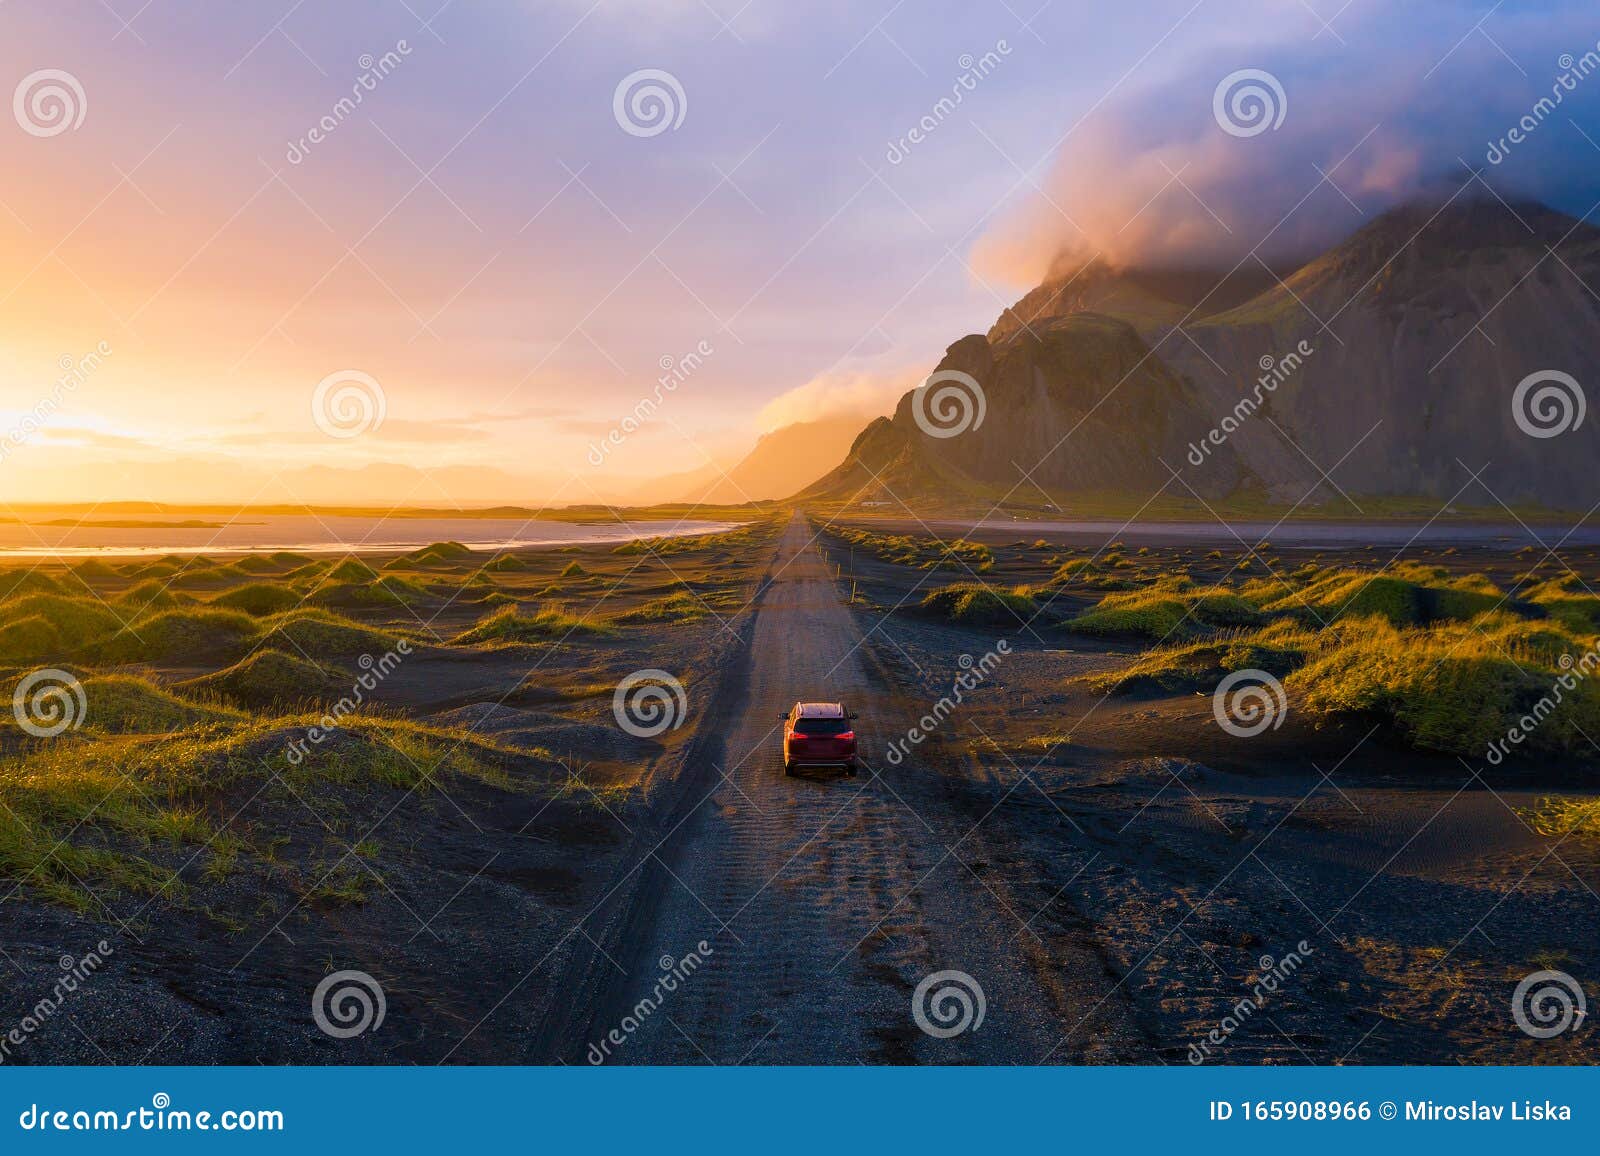 gravel road at sunset with vestrahorn mountain and a car driving, iceland